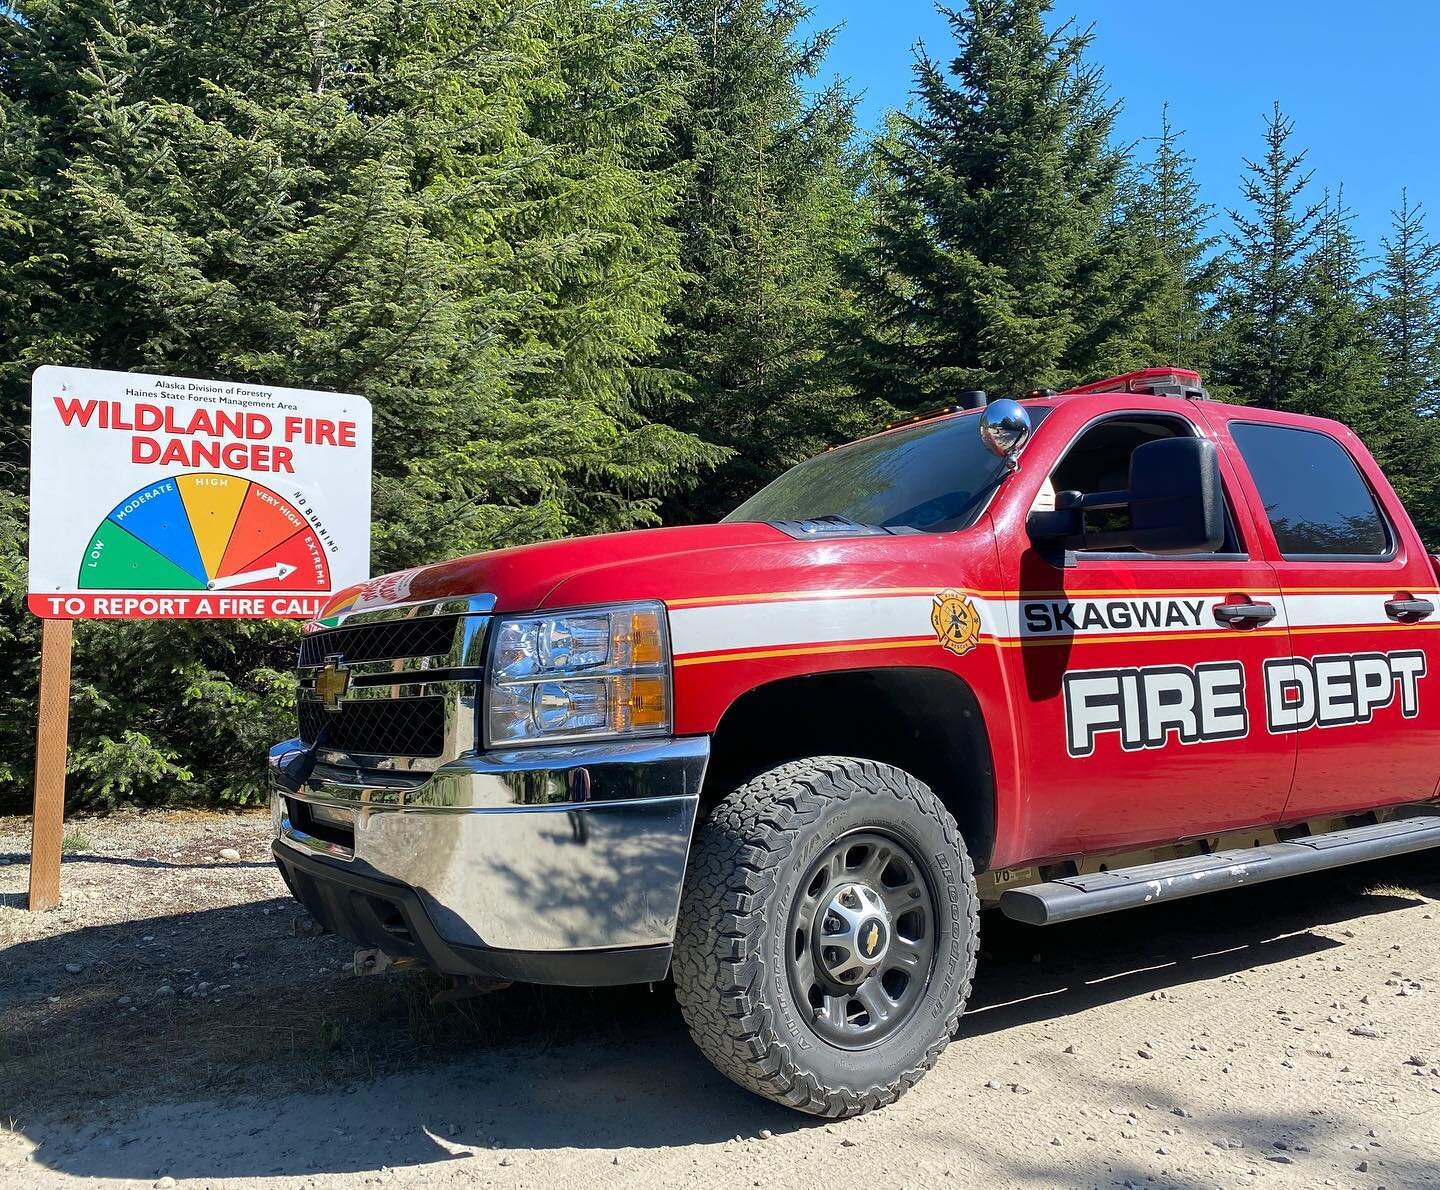 Extreme Fire Danger in Skagway. Burn permits are currently suspended. See the department website for more information.